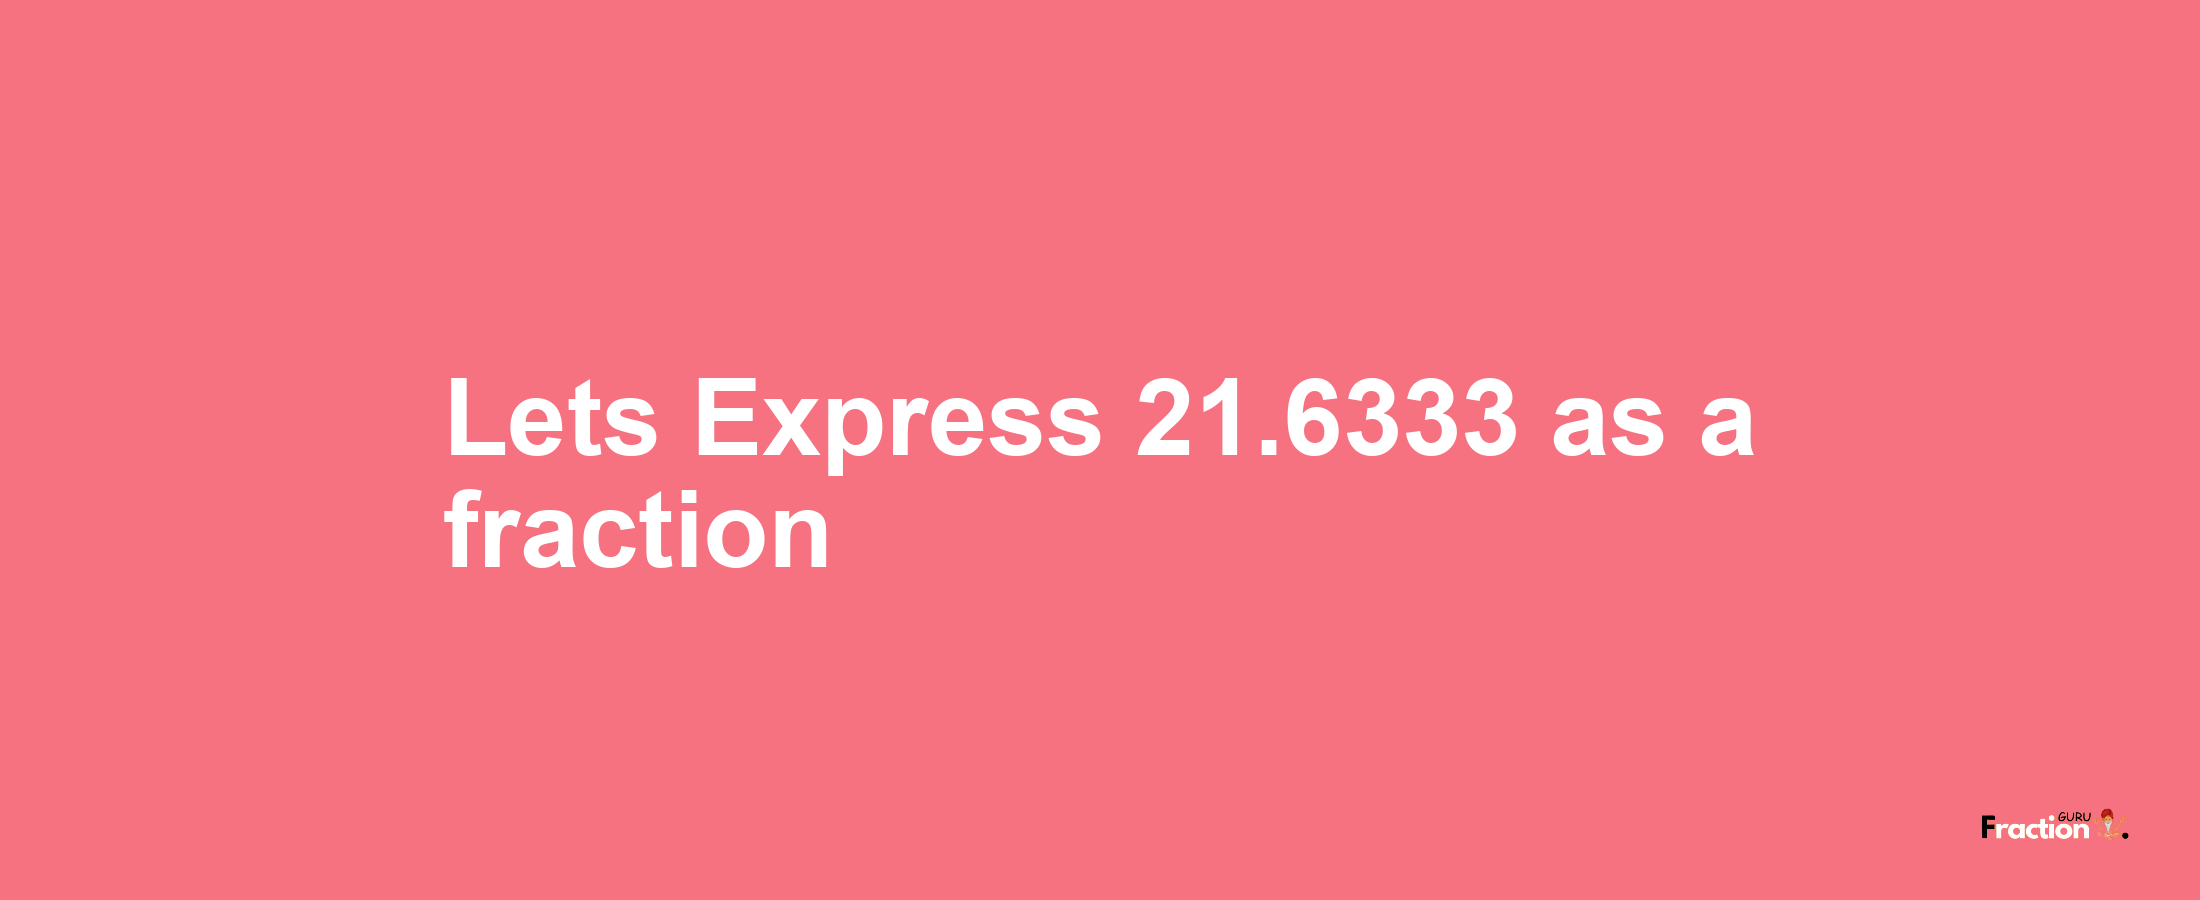 Lets Express 21.6333 as afraction